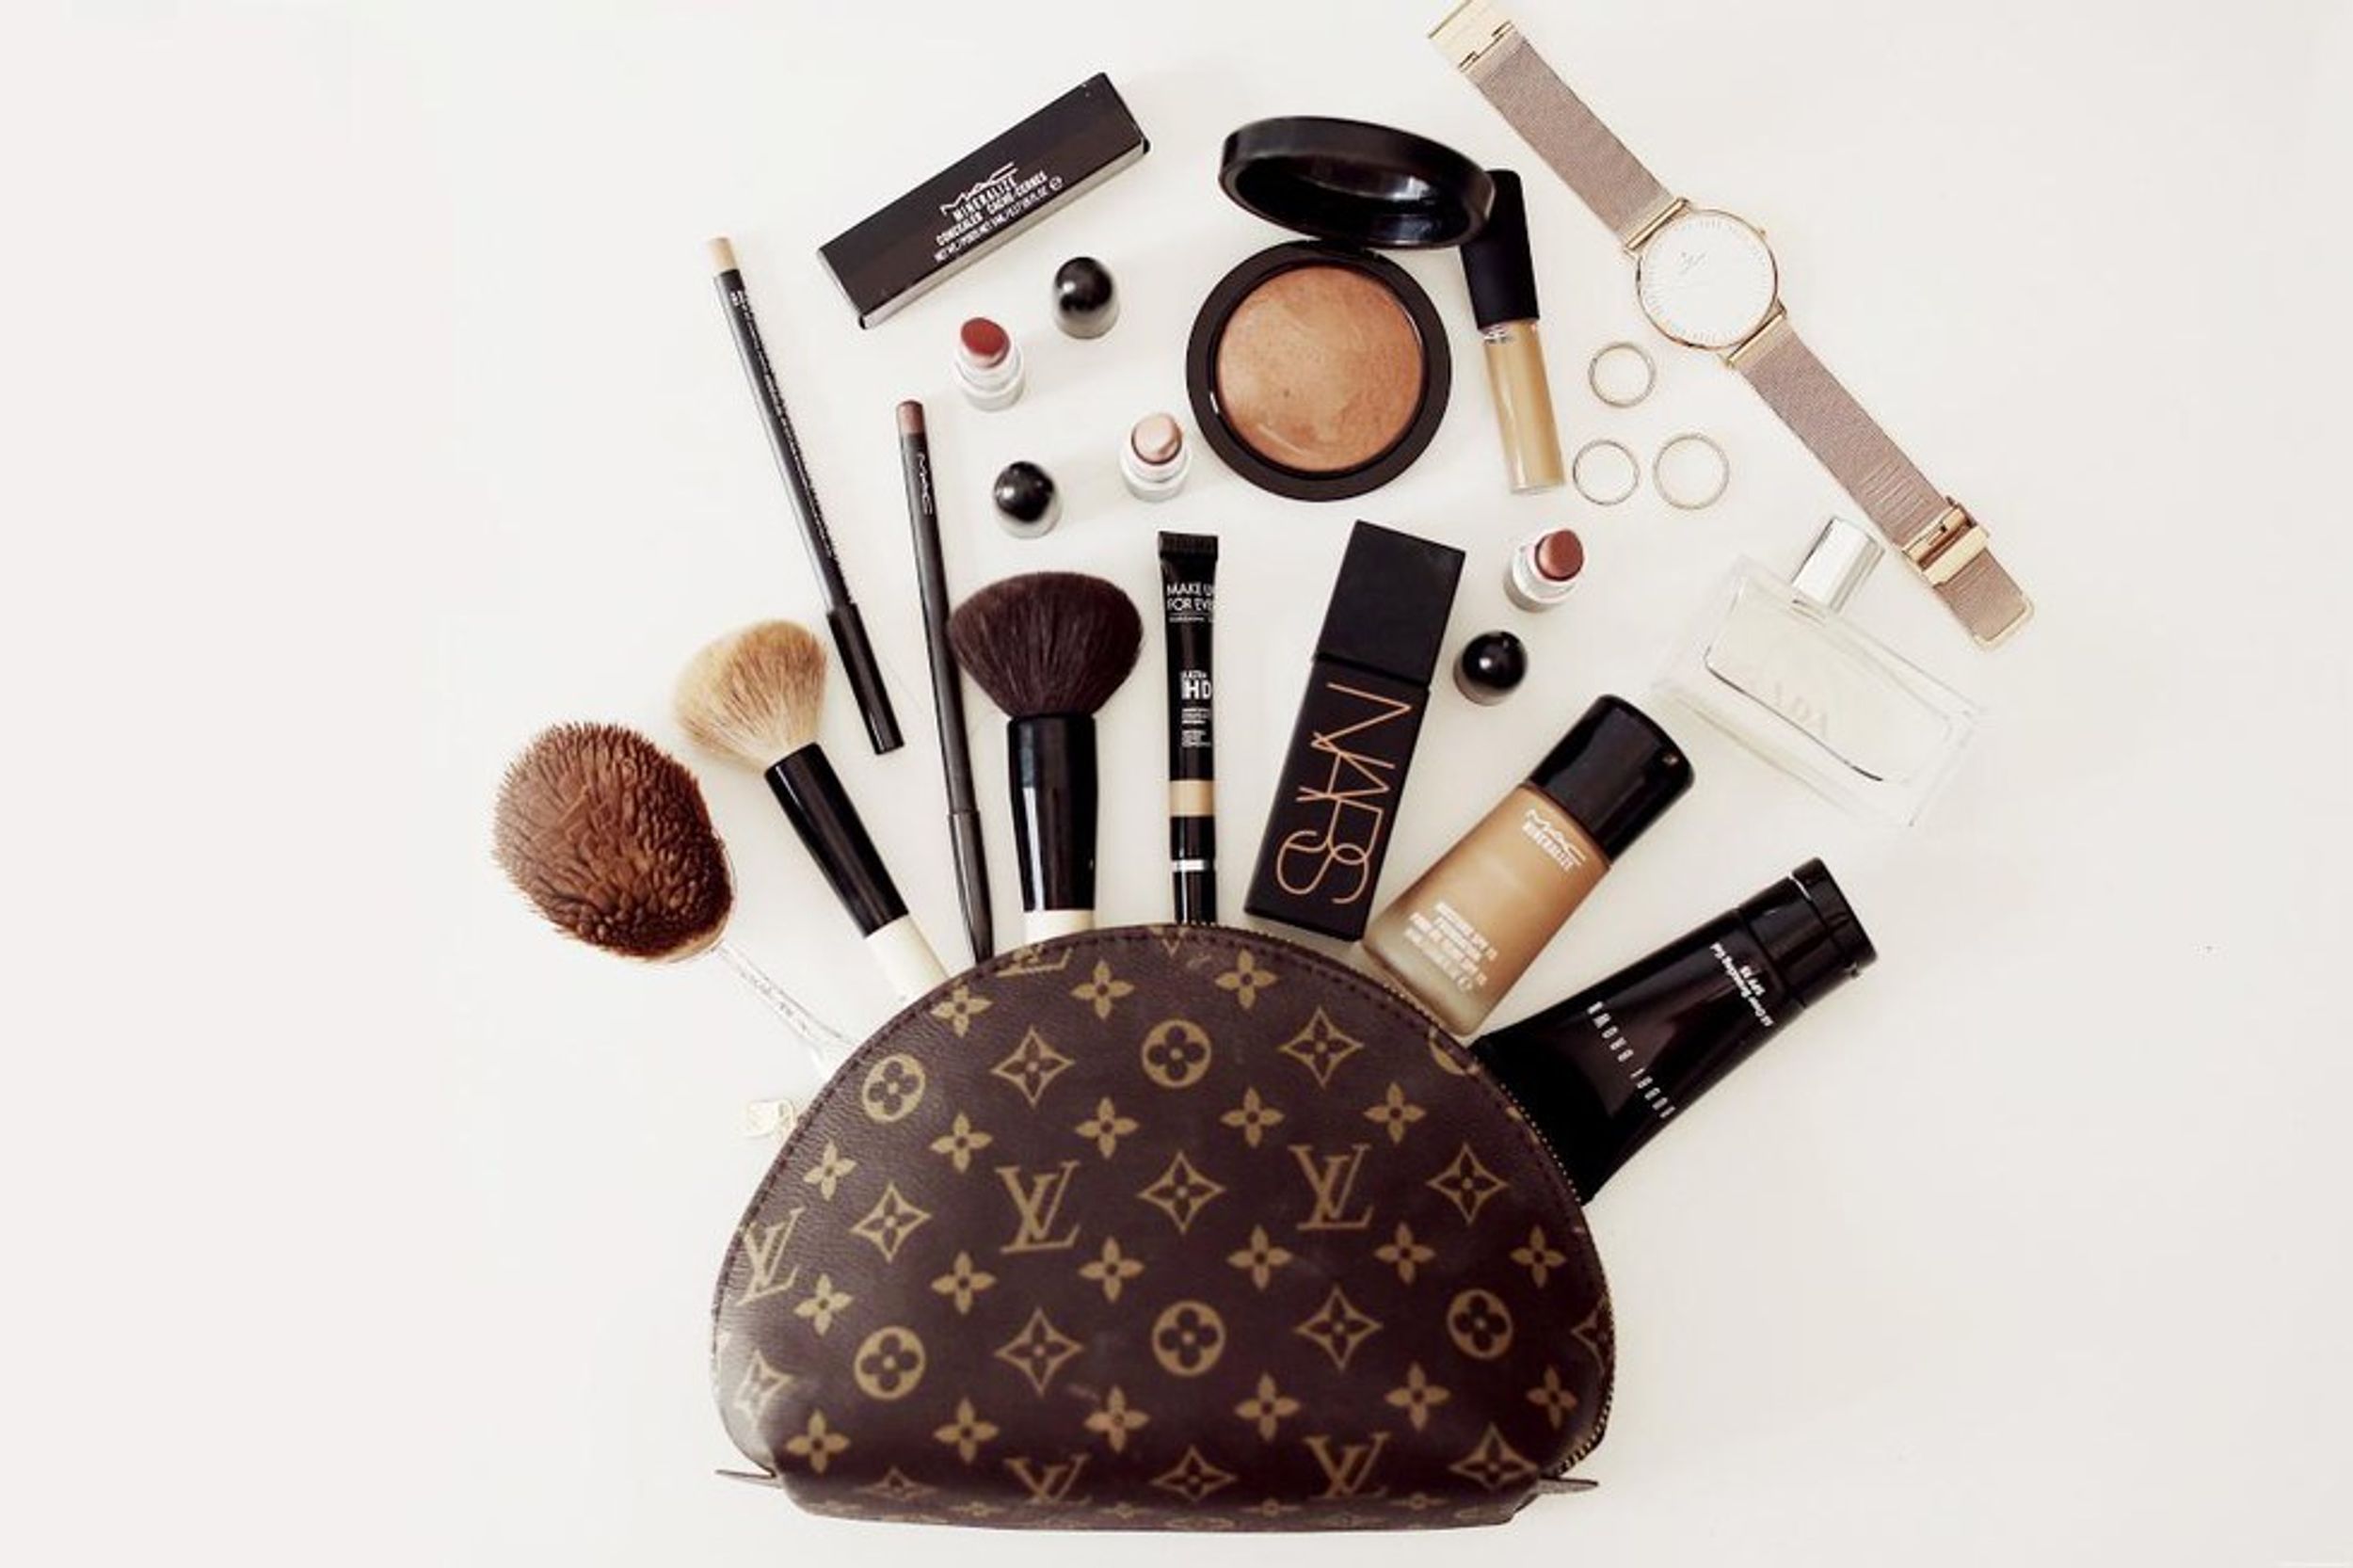 What's In Your Makeup Bag?